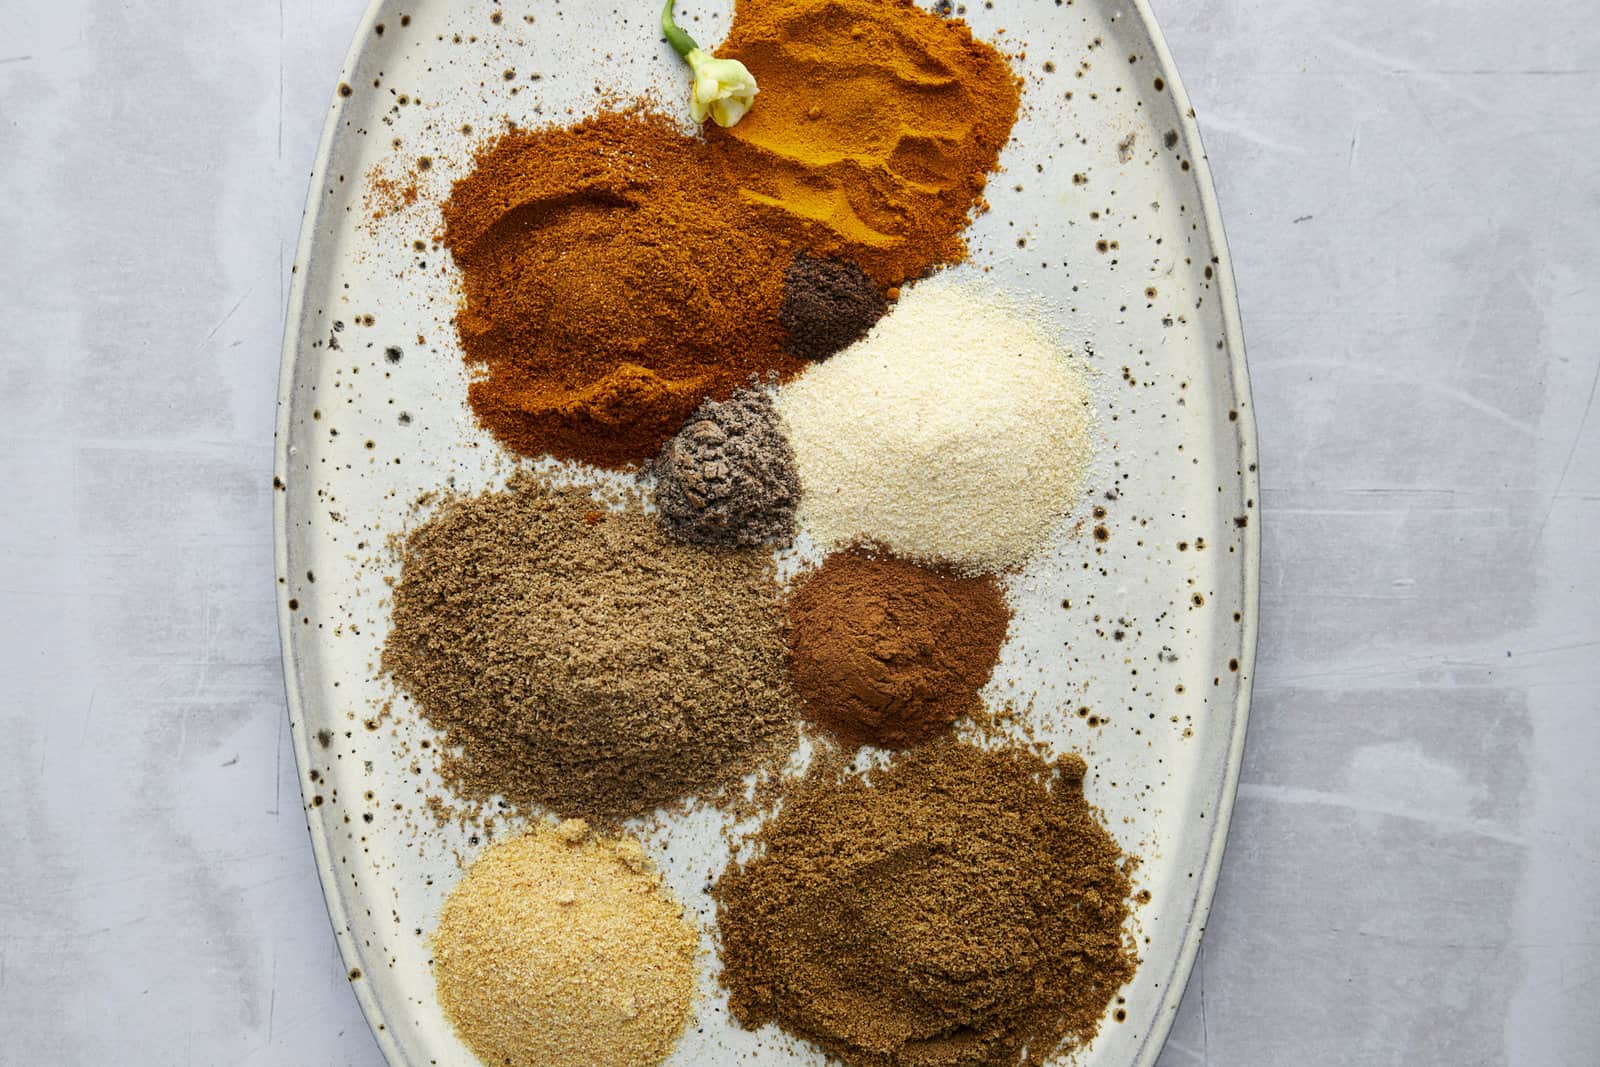 Piles of spices on a platter to make shawarma spice.